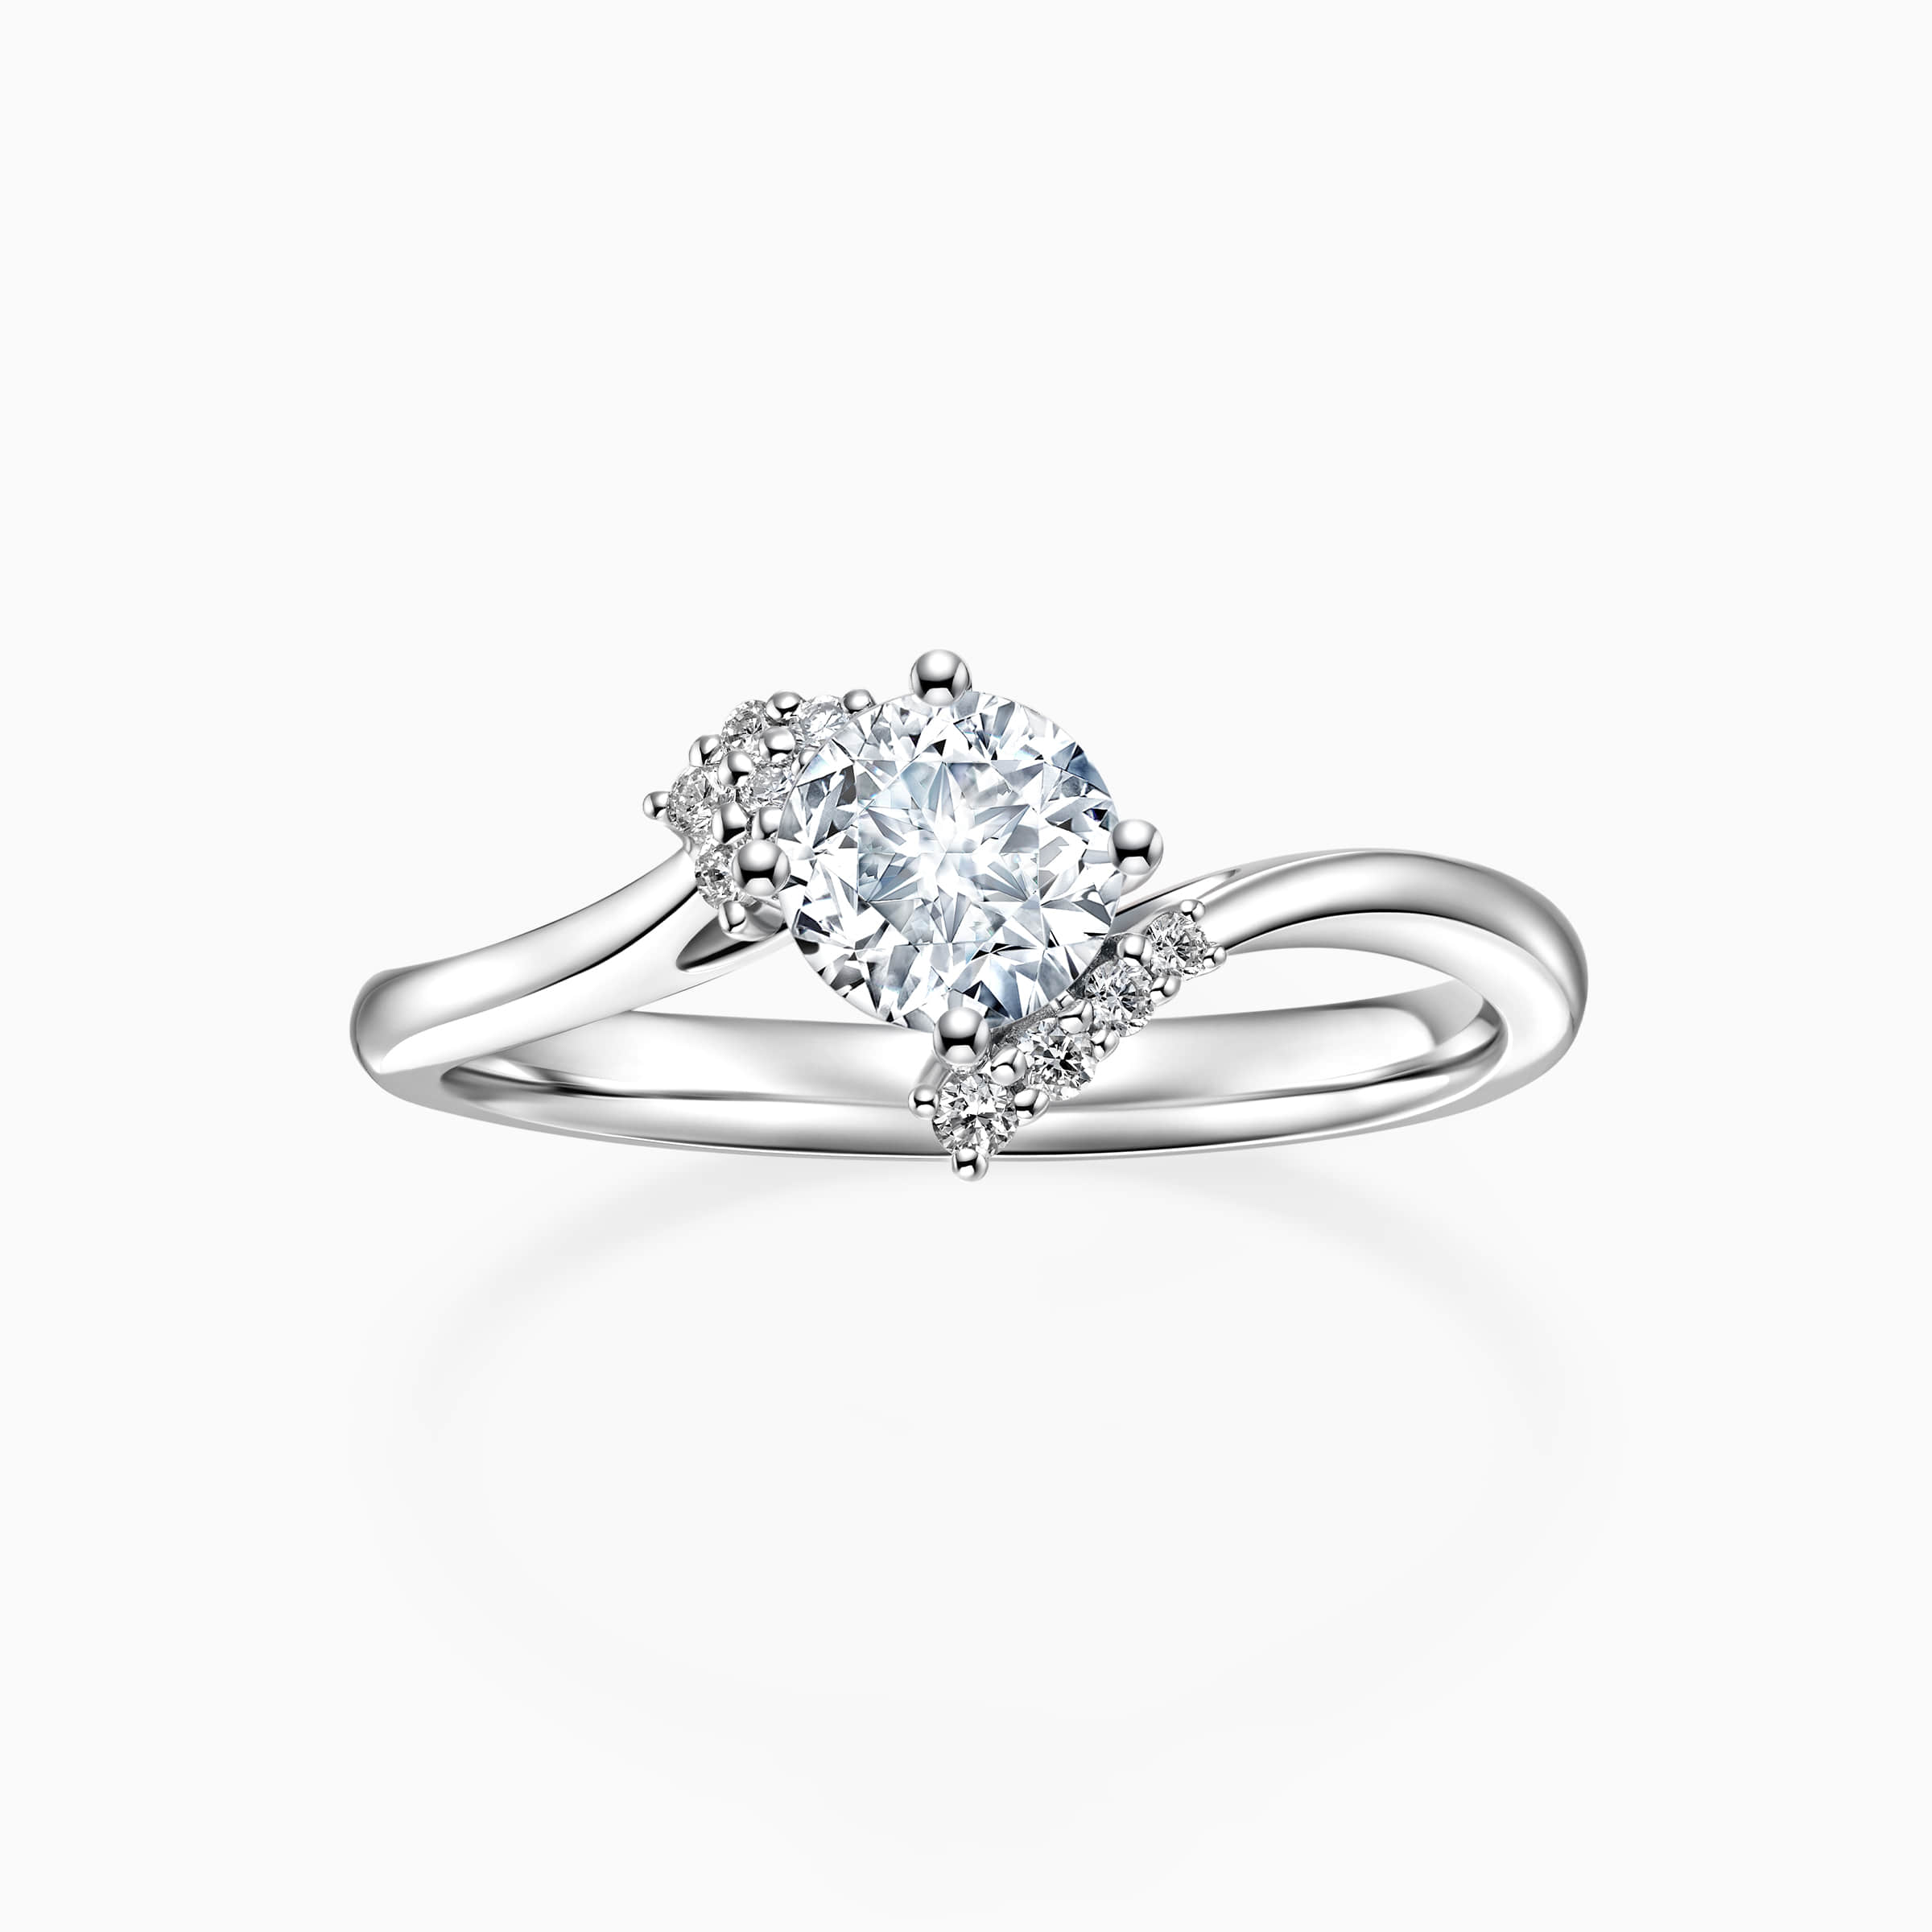 Darry Ring diamond bypass engagement ring white gold